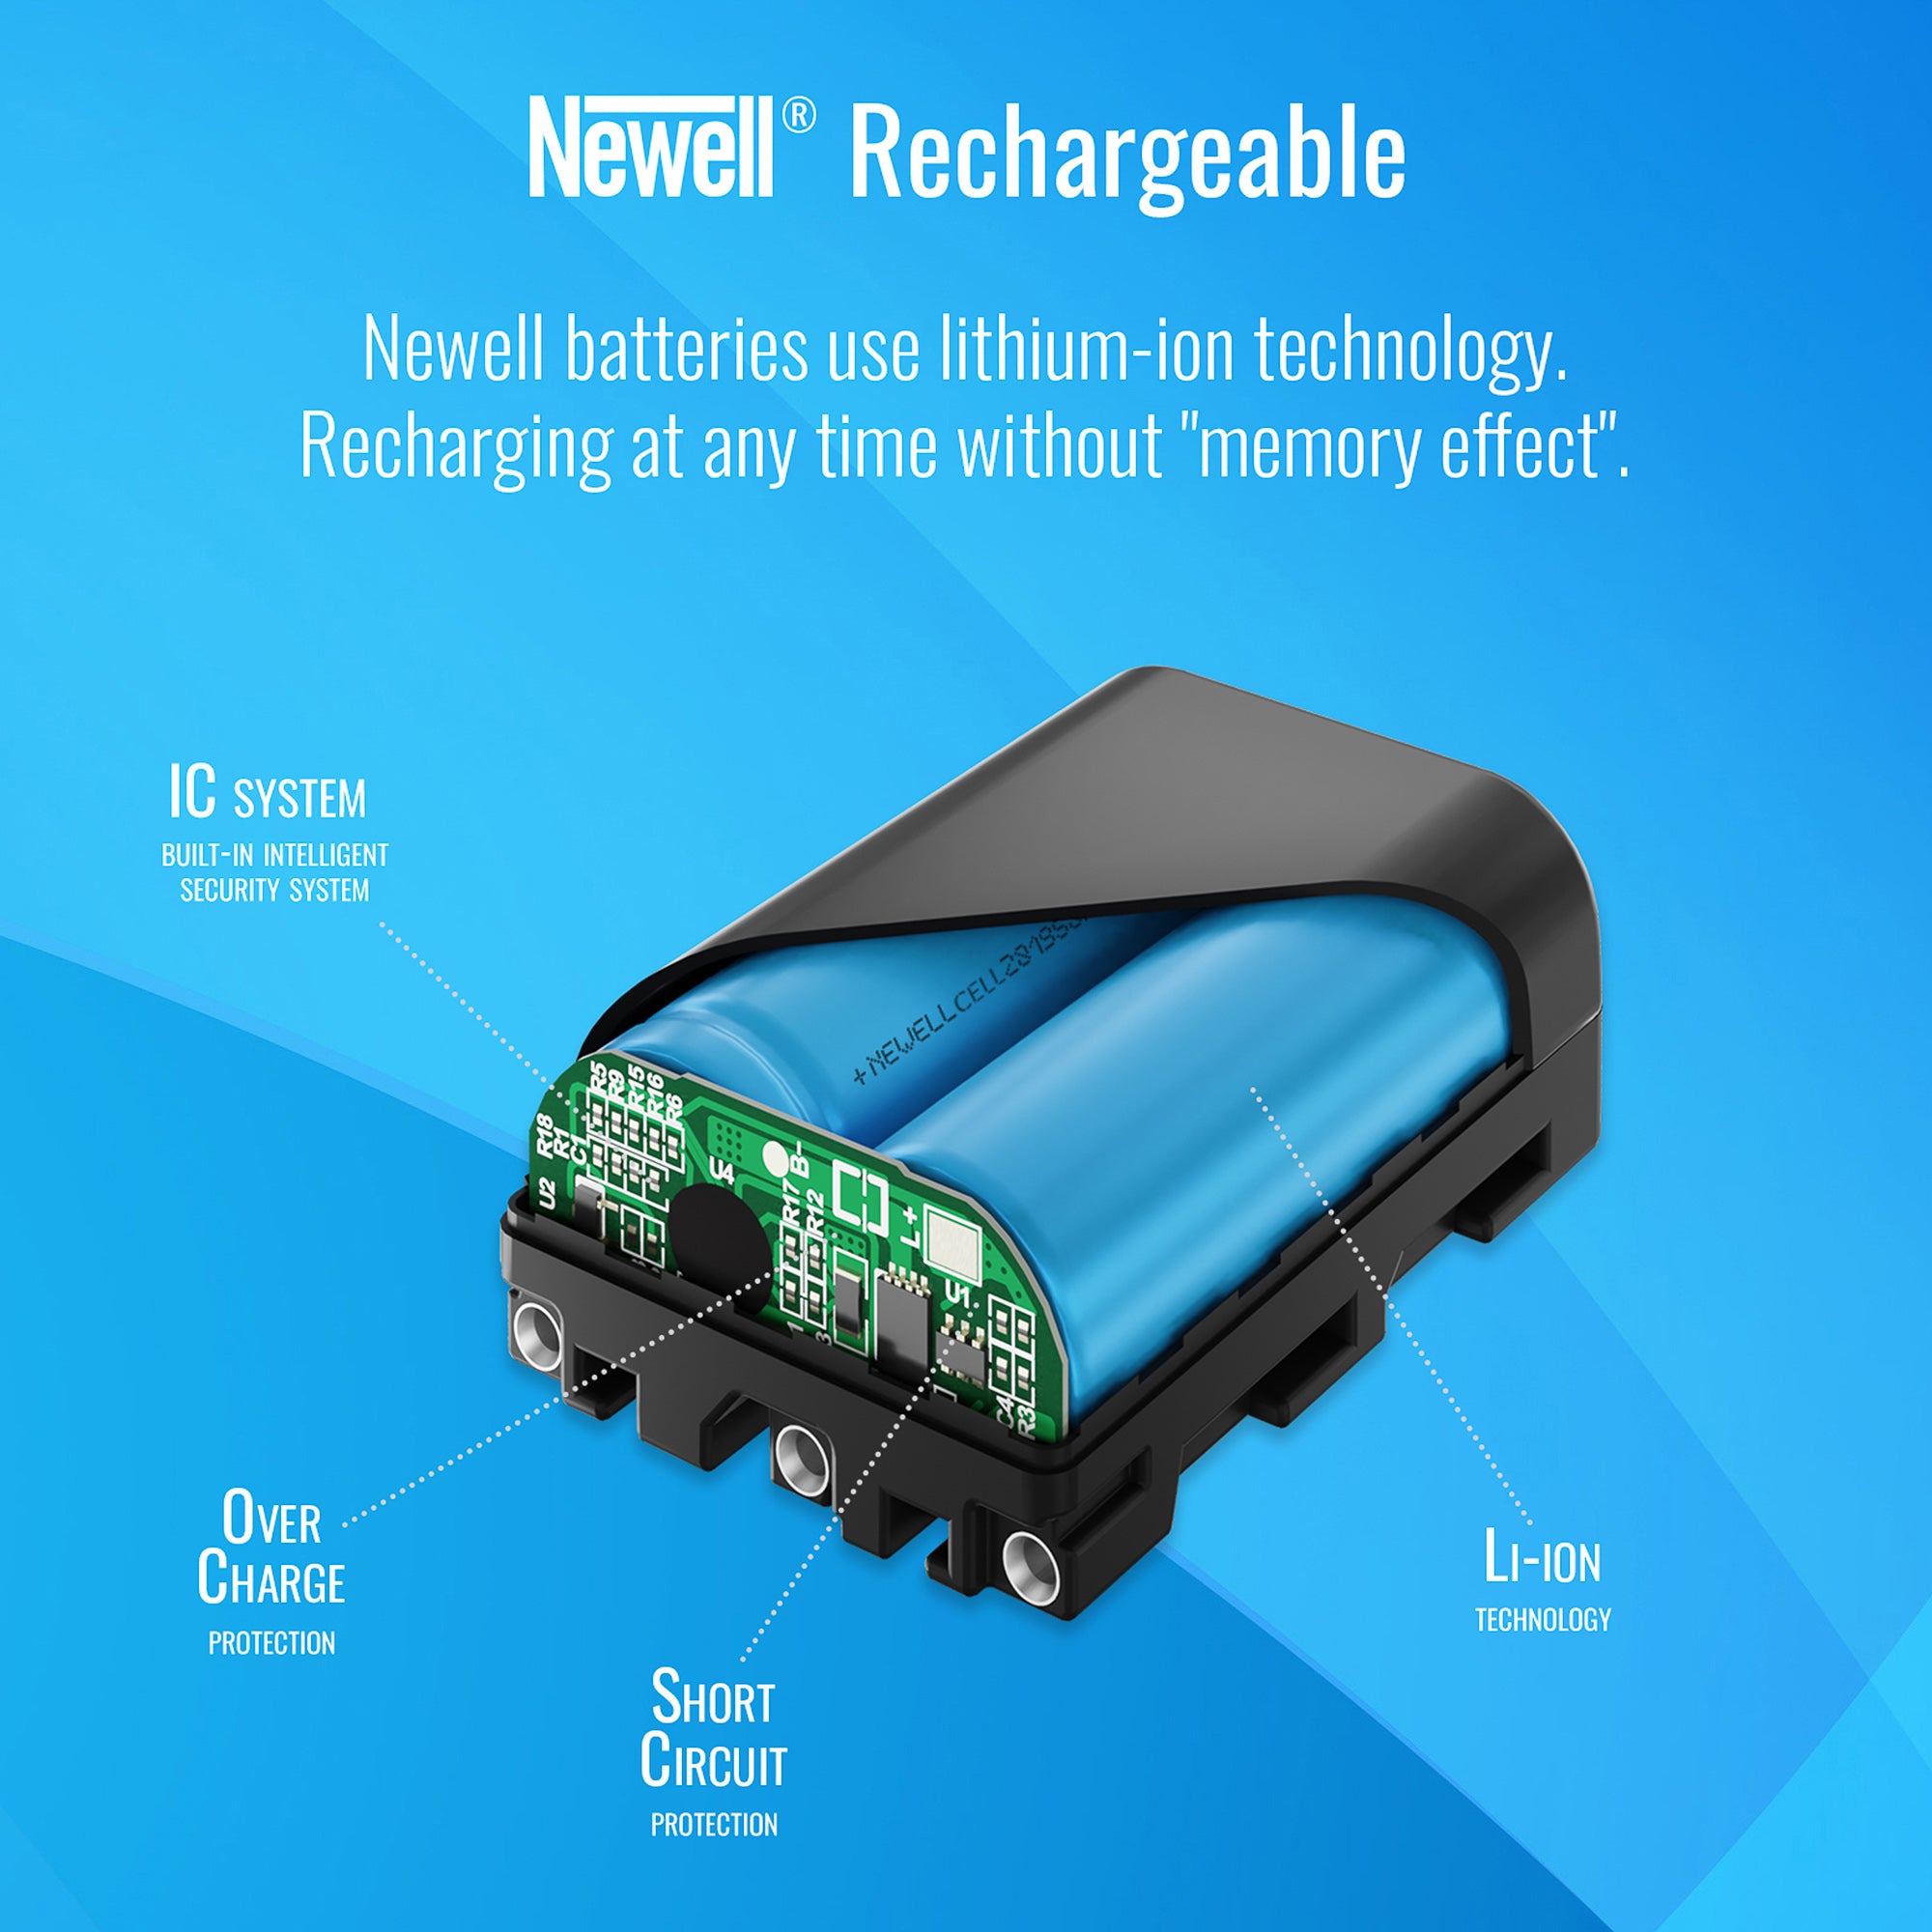 Newell Battery Pack BP-V95 SLIM V-Mount with USB and D-Tap. LED Charge Level Display